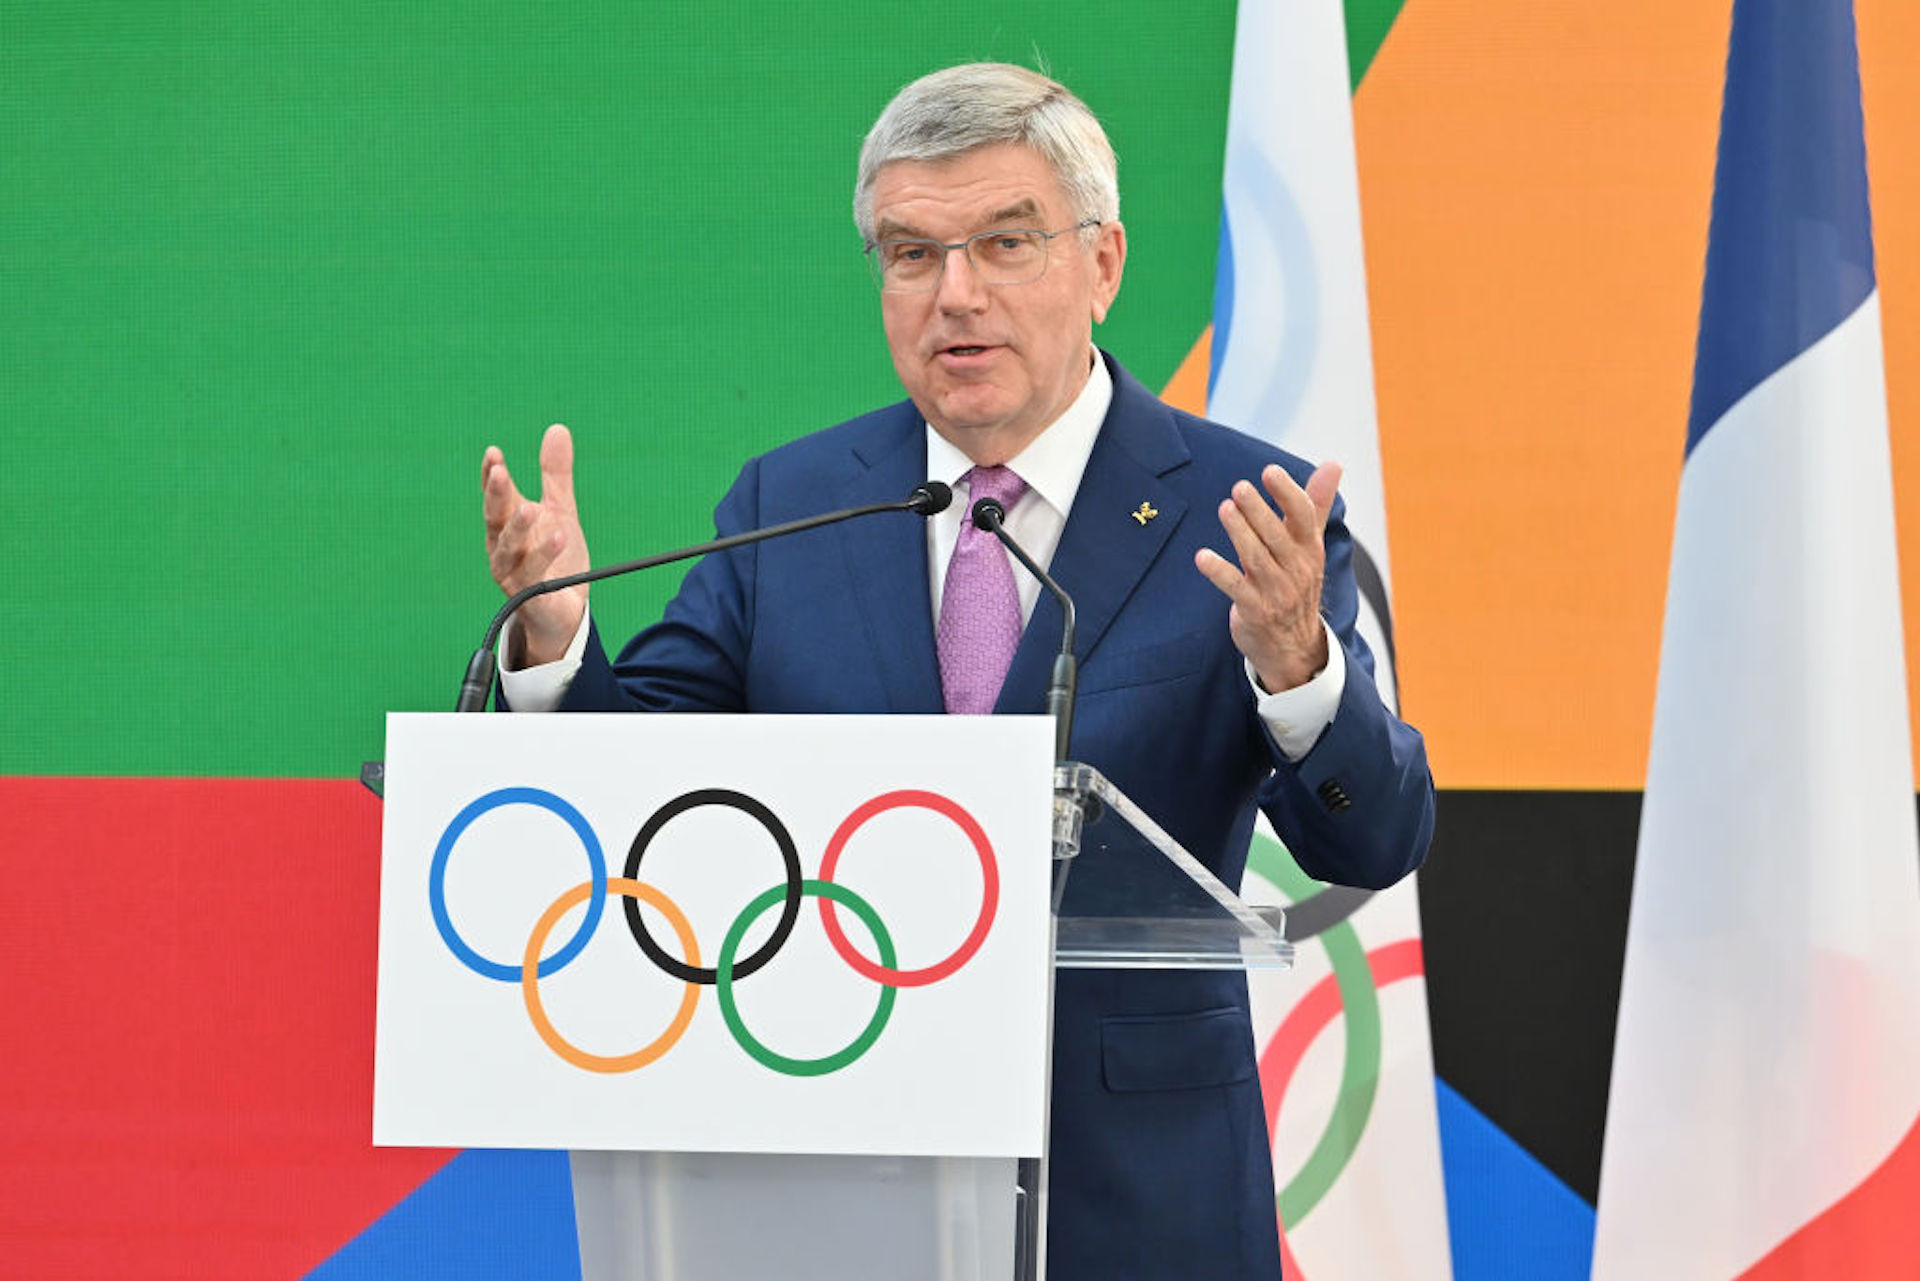 IOC President welcomes Palestinian NOC to Olympic House